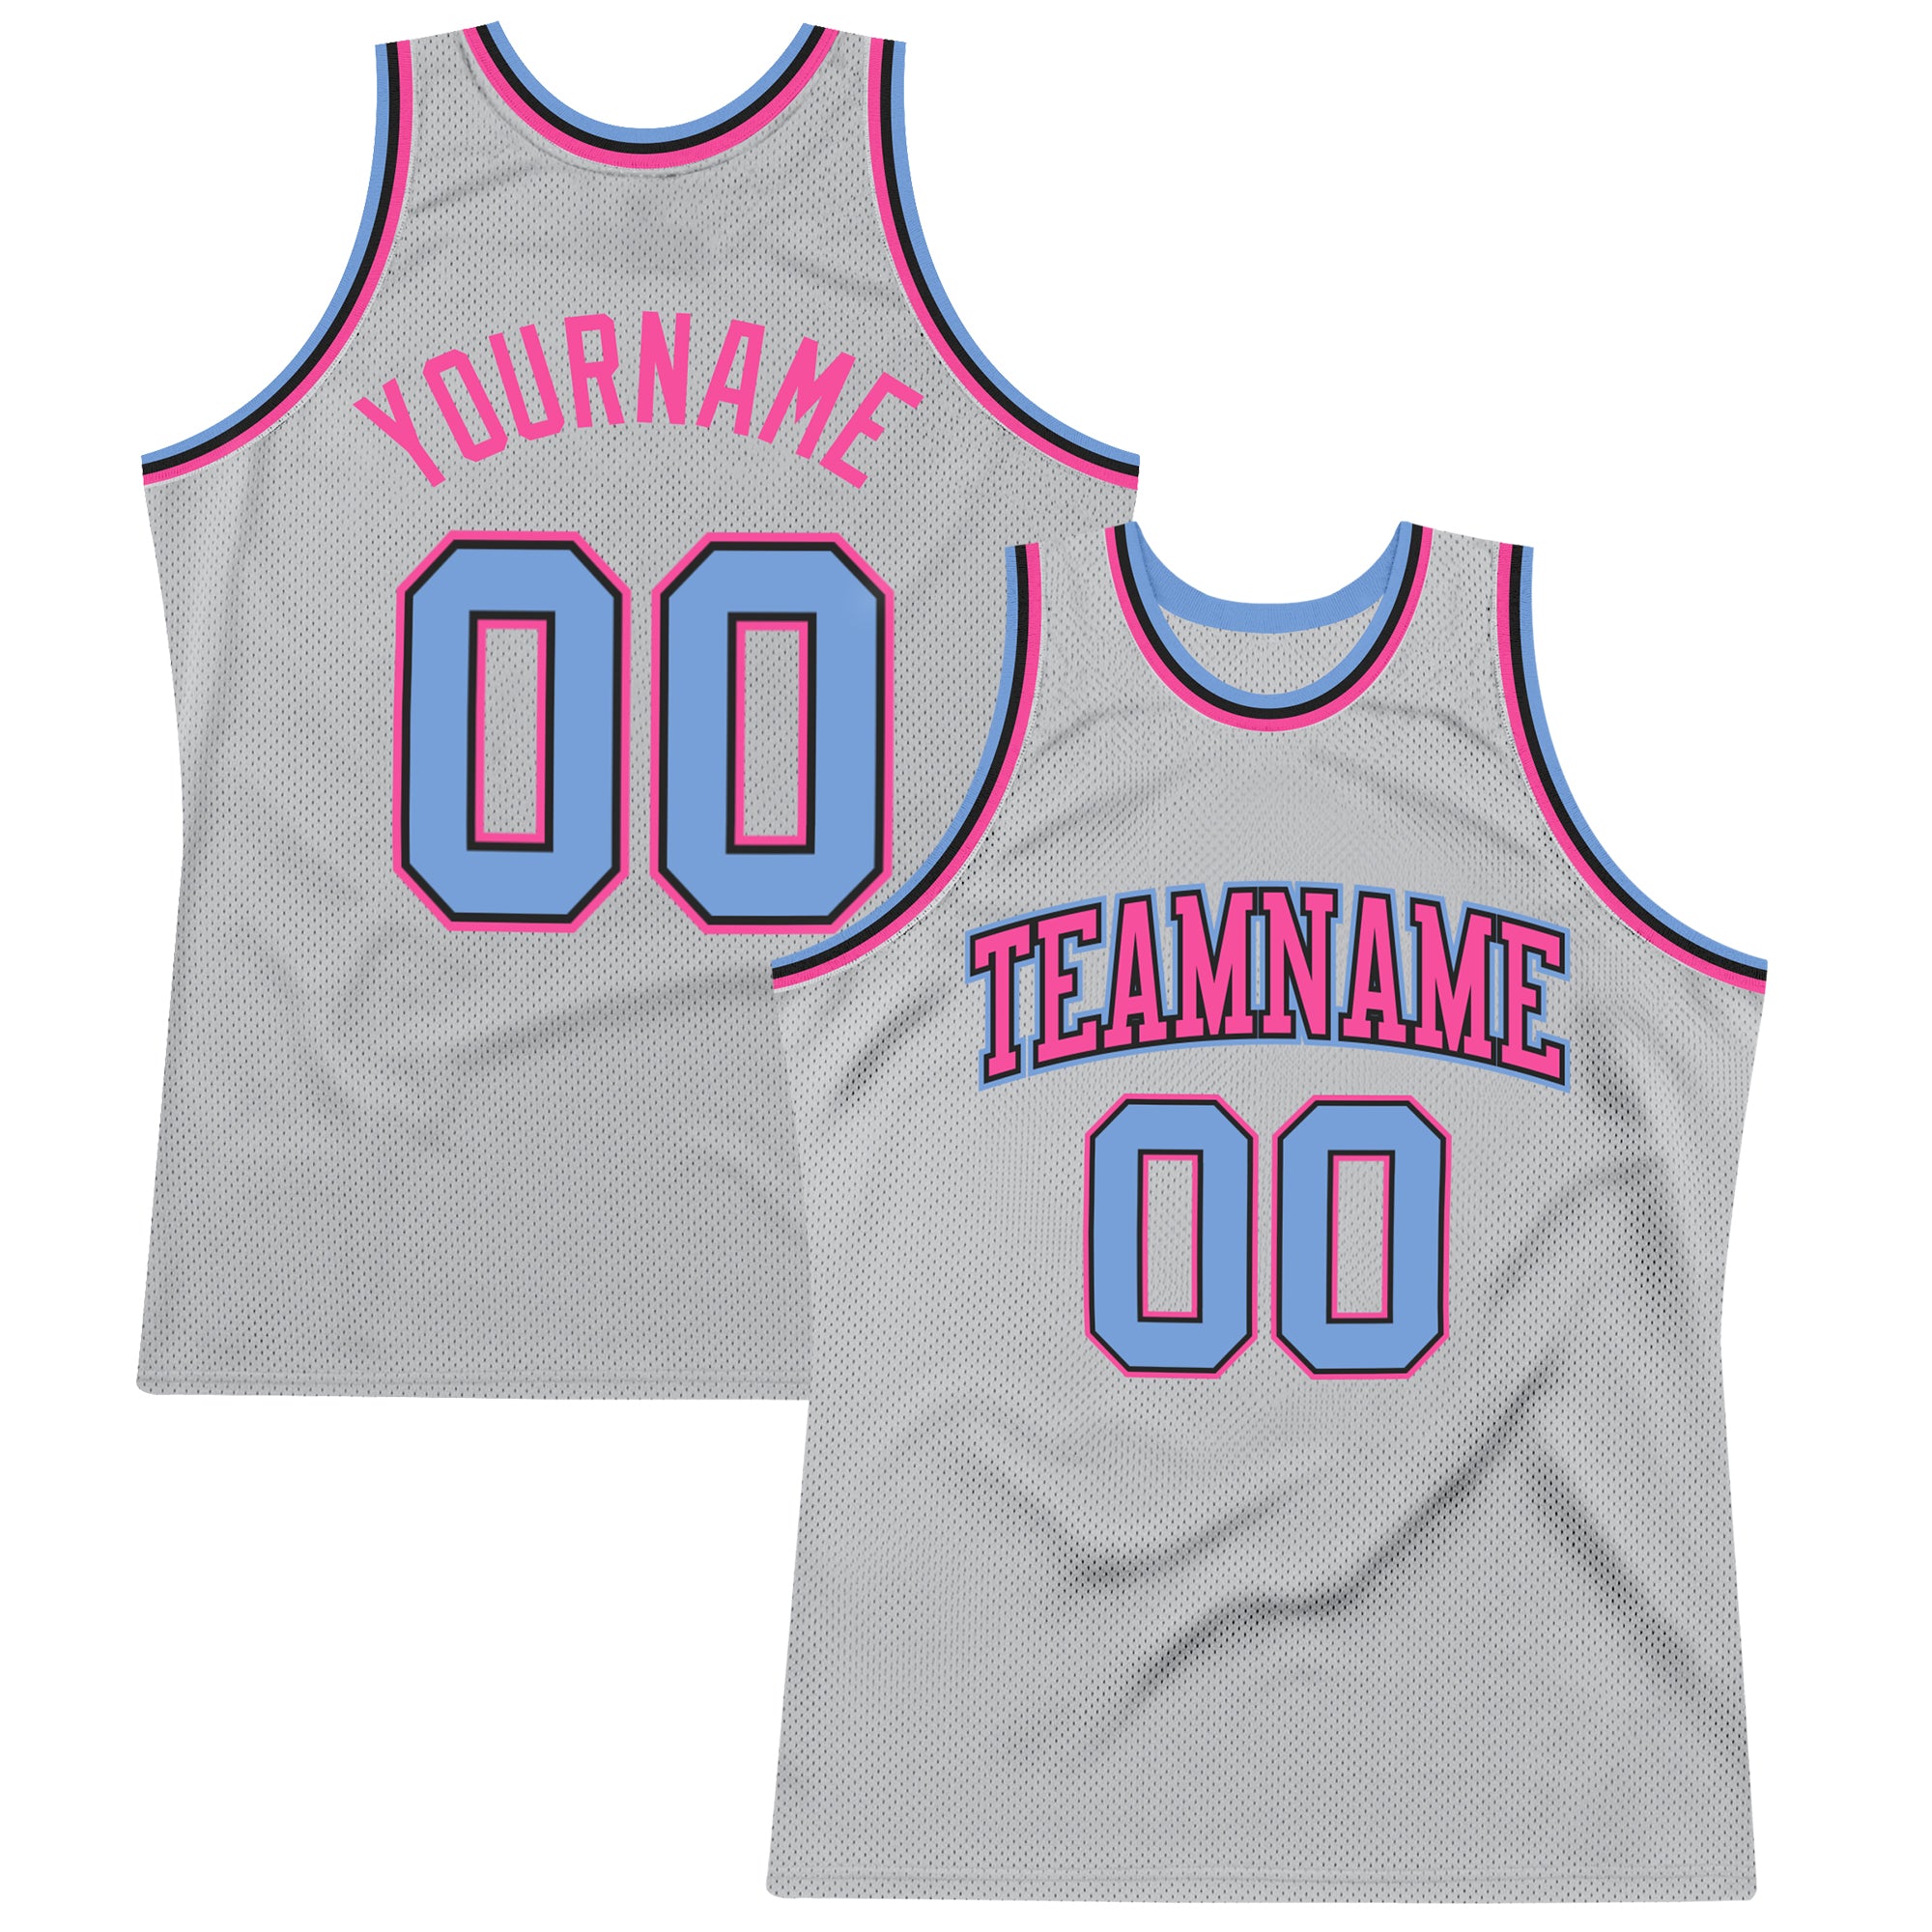 FIITG Custom Basketball Jersey Silver Gray Light Blue-Pink Authentic Throwback